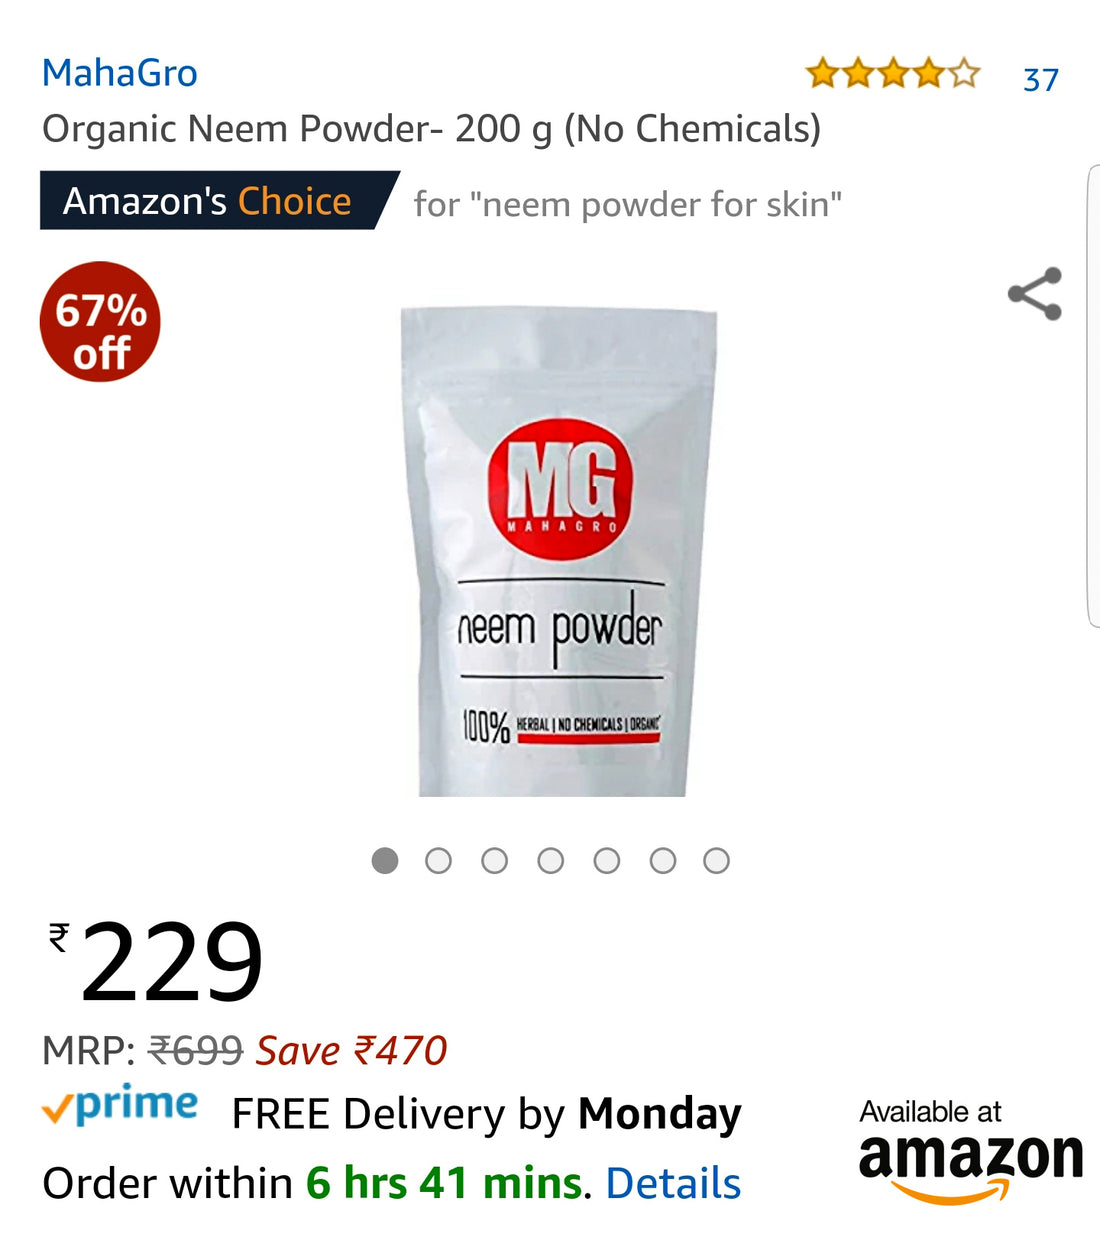 For all kinds of common skin problems, amazon.in recommends MahaGro Neem Powder!